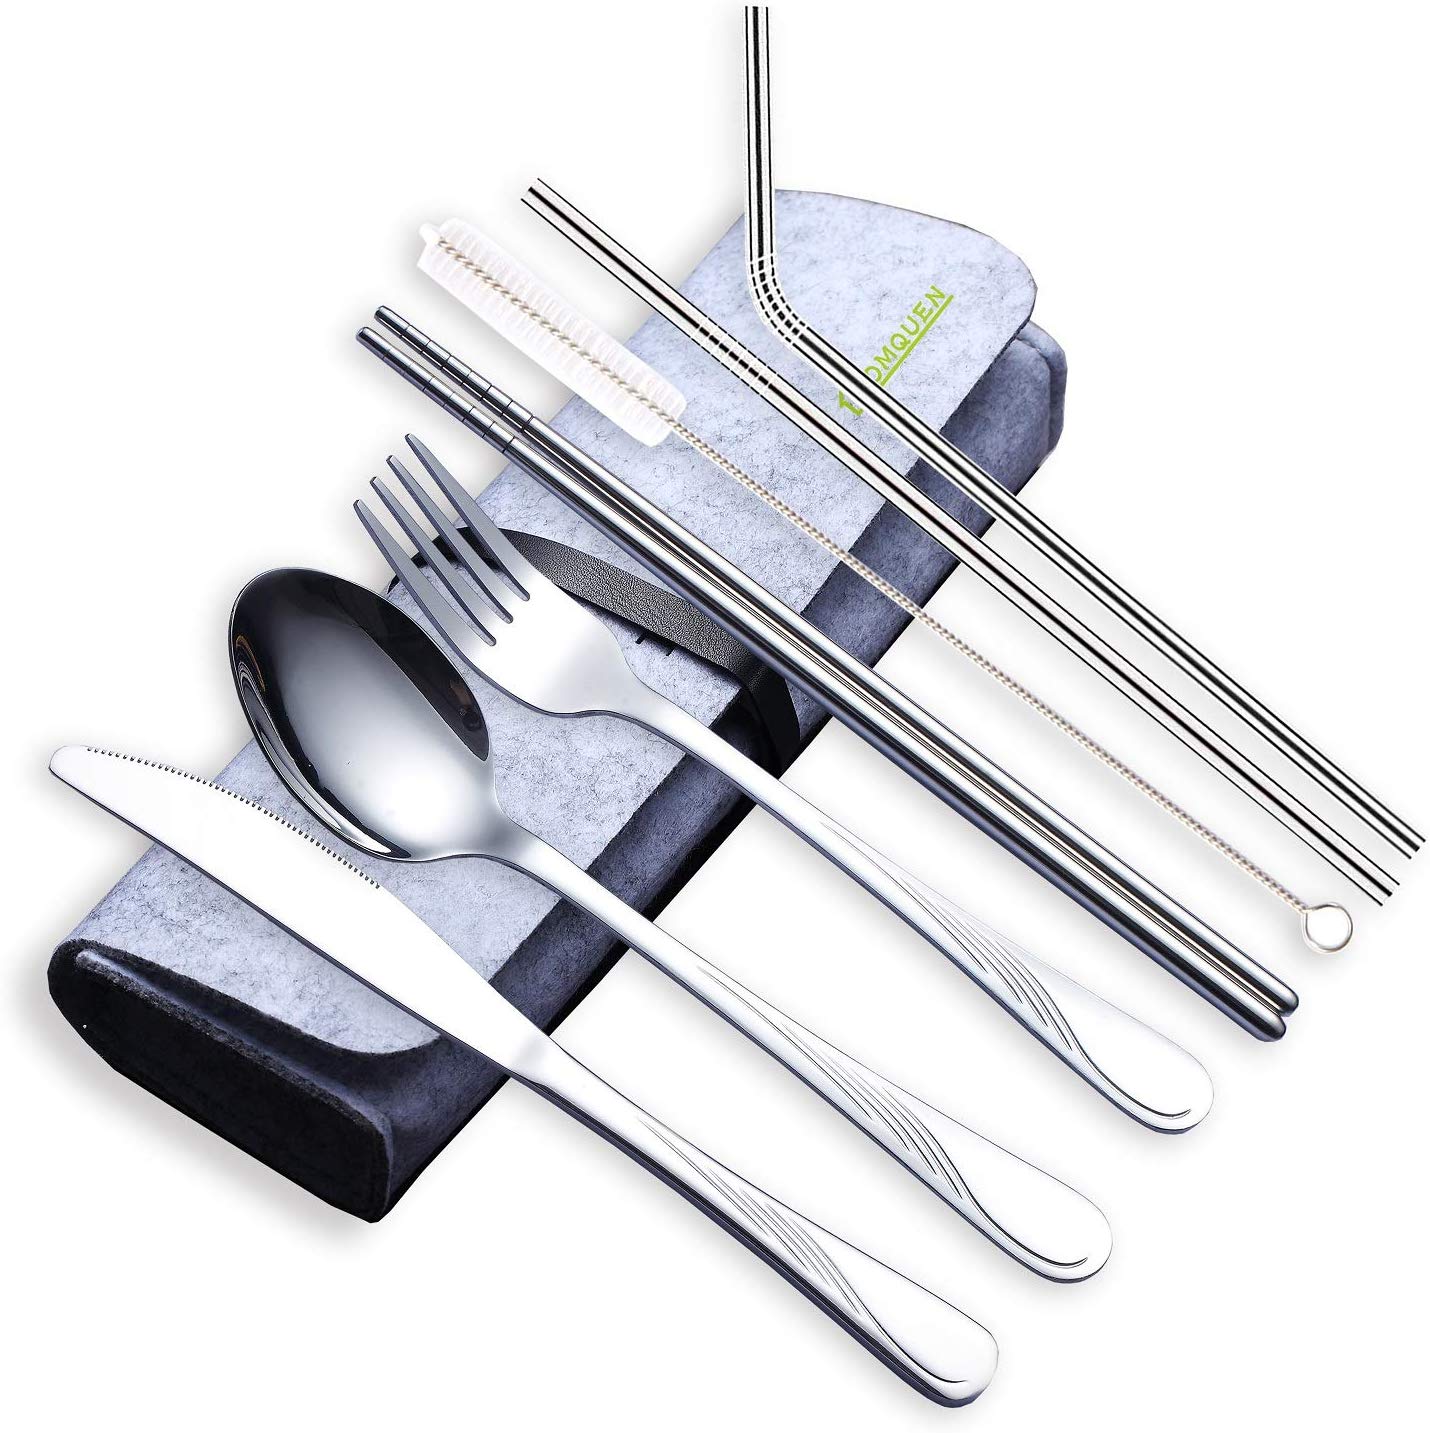 Portable Camping Set Cutlery Travel Stainless Steel Chopstick Fork Spoon New 